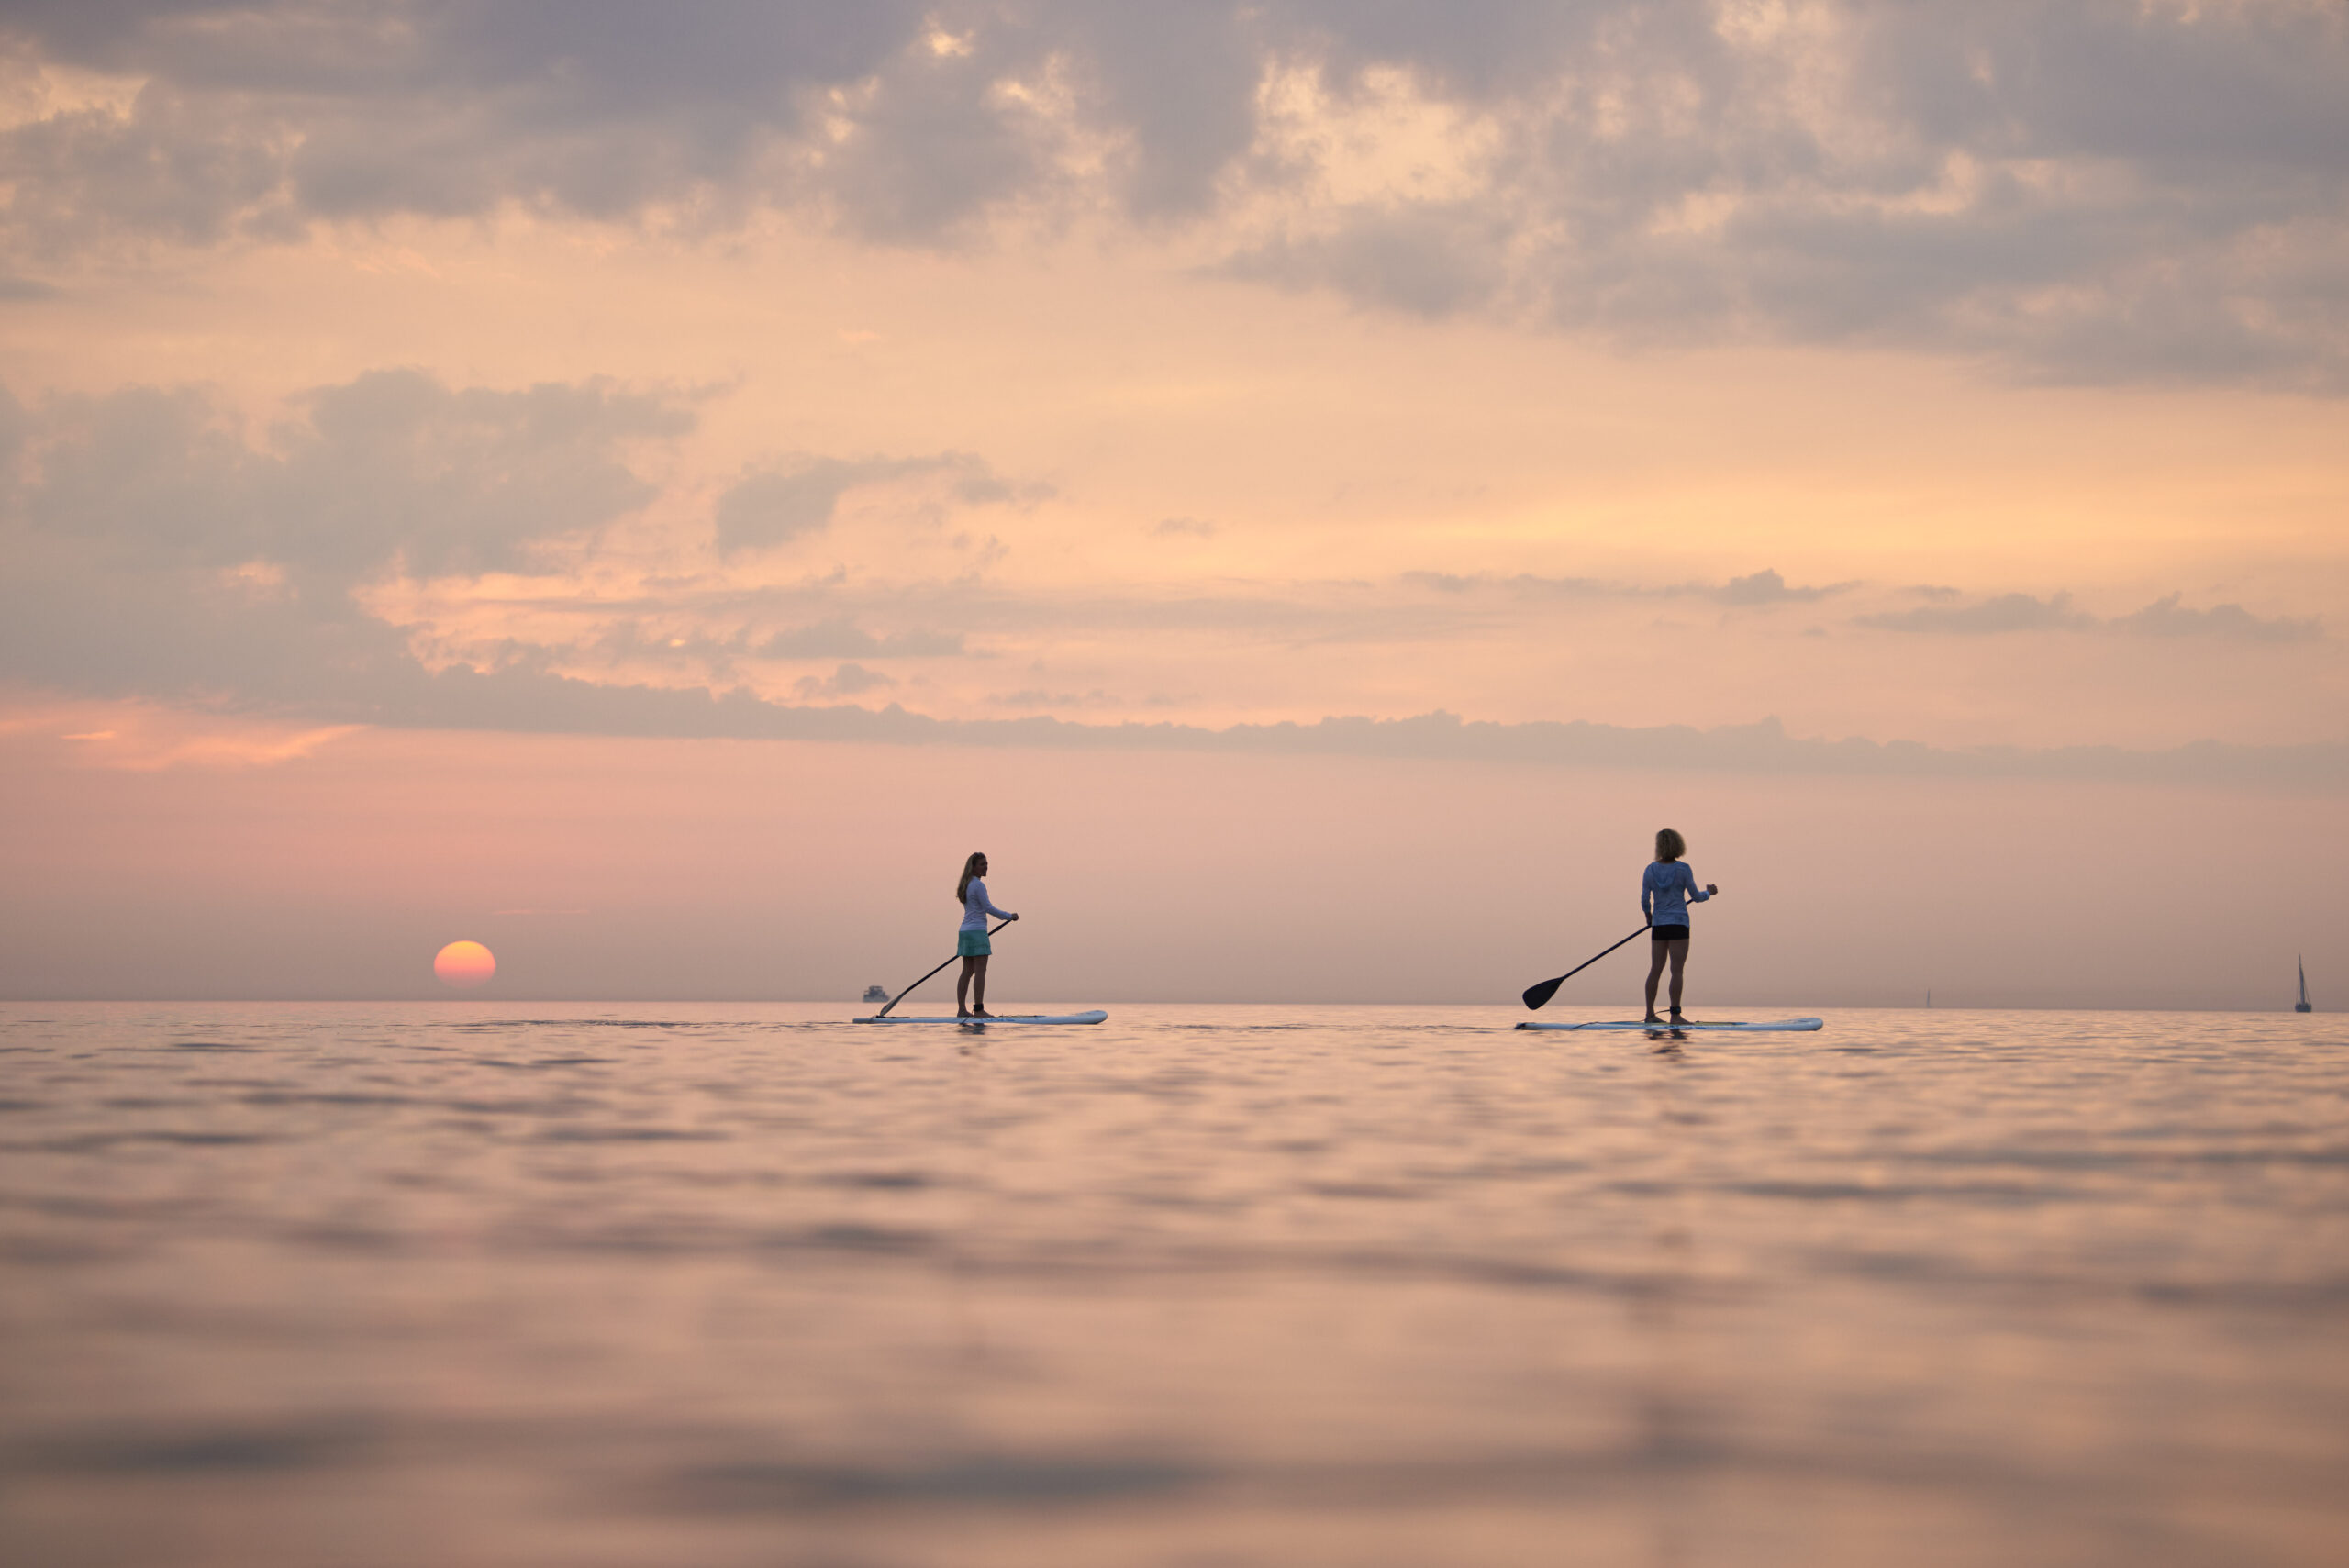 Two women standing on paddleboards as the sun sets over the lake.